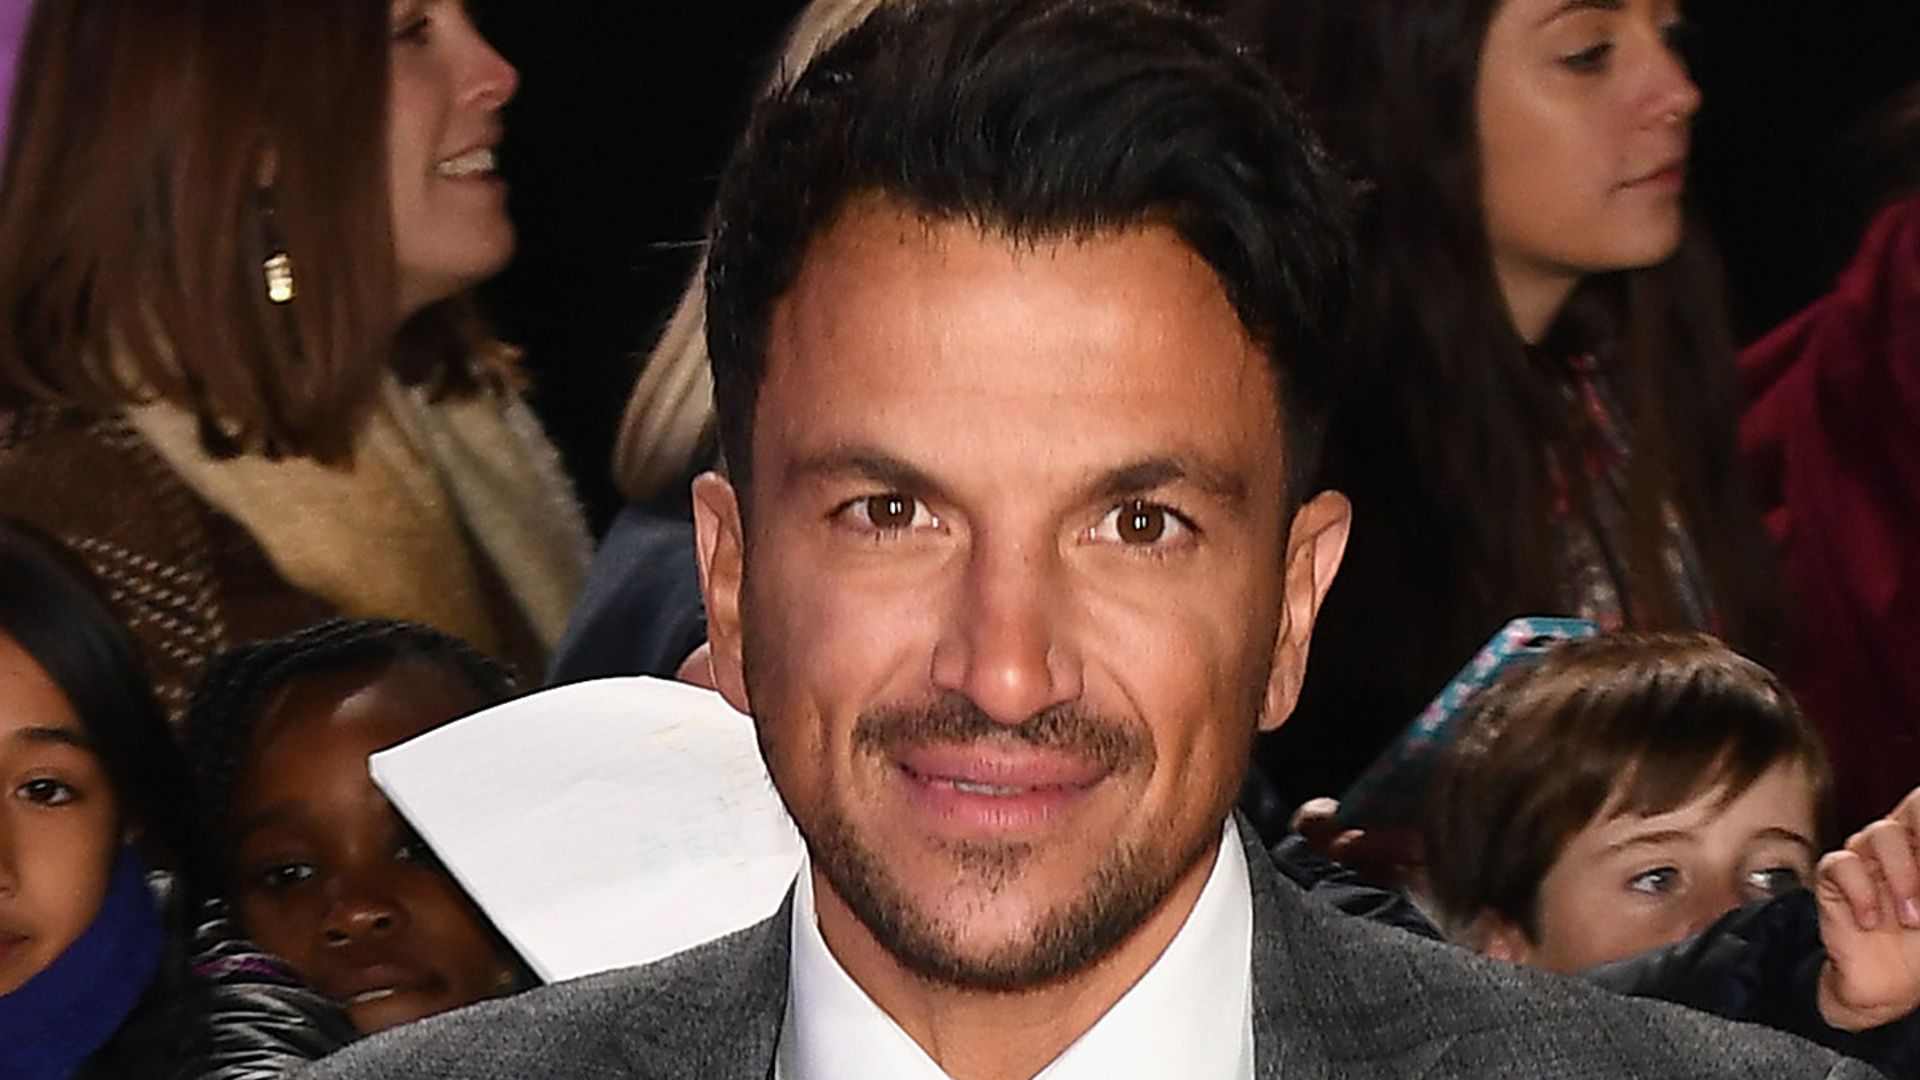 Peter Andre says royal baby Archie has made him broody | HELLO!